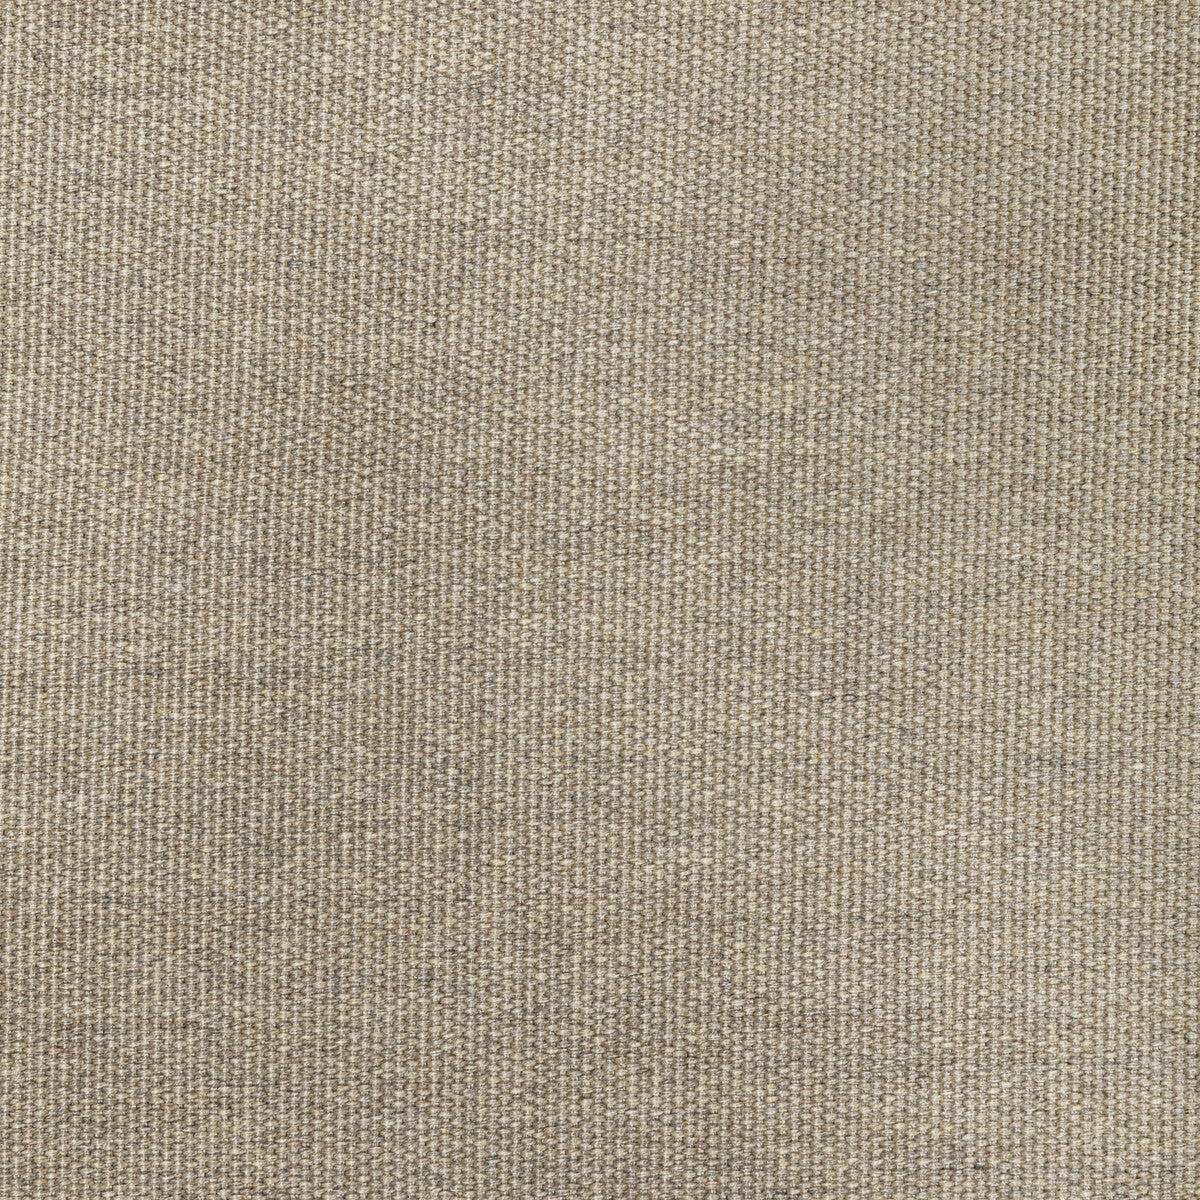 Kravet Basics fabric in 36827-106 color - pattern 36827.106.0 - by Kravet Basics in the Indoor / Outdoor collection